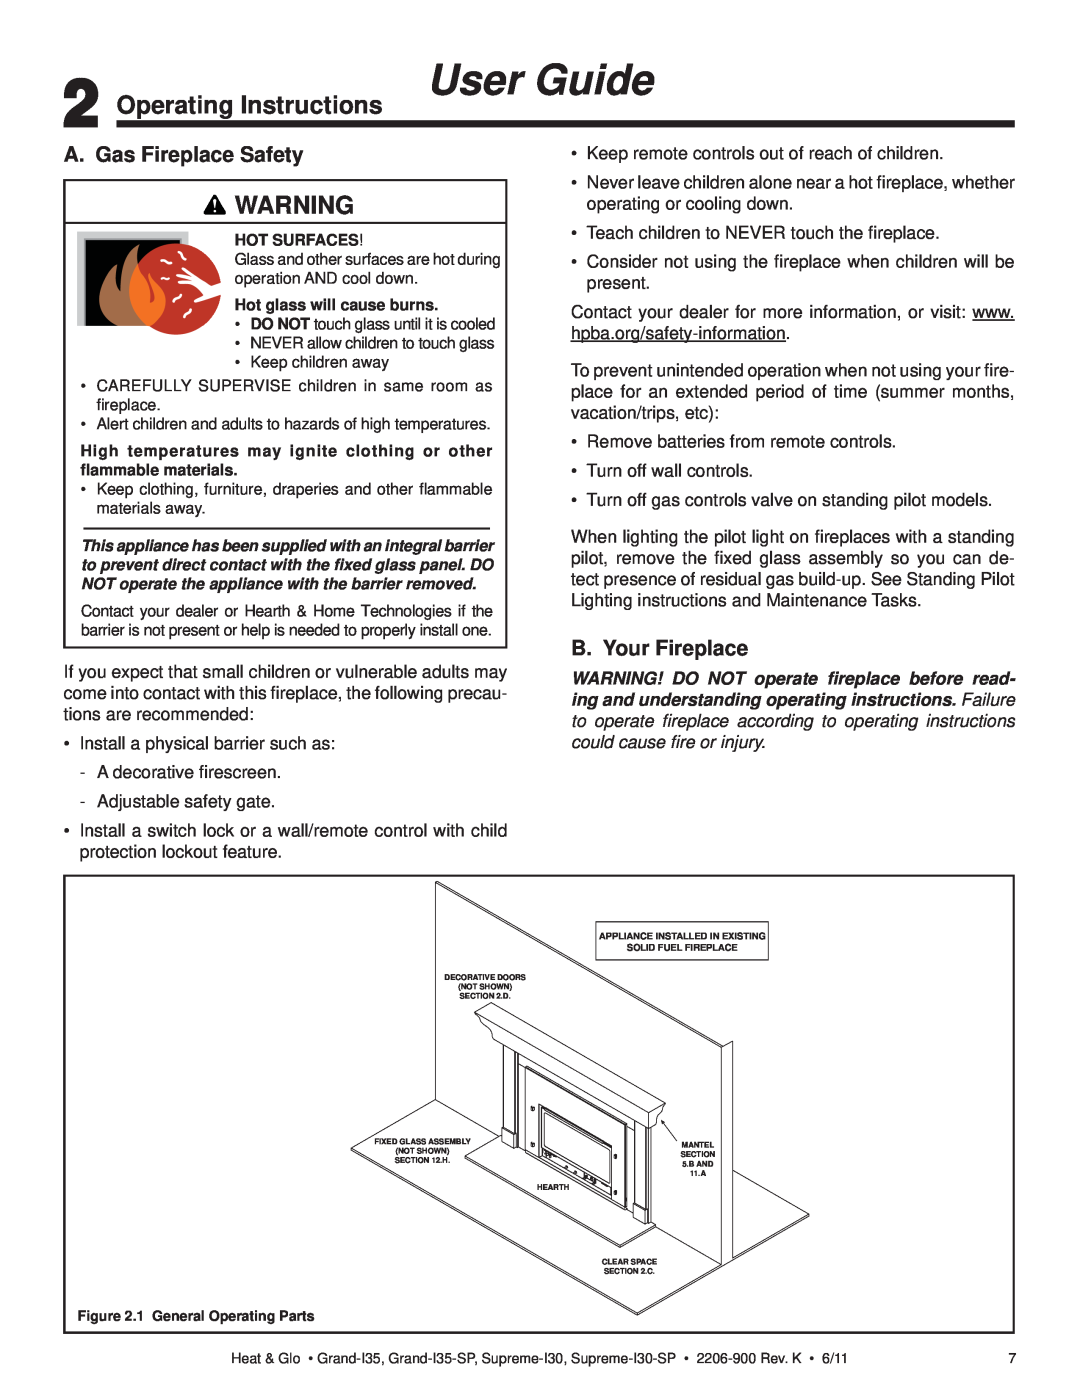 Heat & Glo LifeStyle GRAND-I35-SP Operating Instructions User Guide, A. Gas Fireplace Safety, B. Your Fireplace 